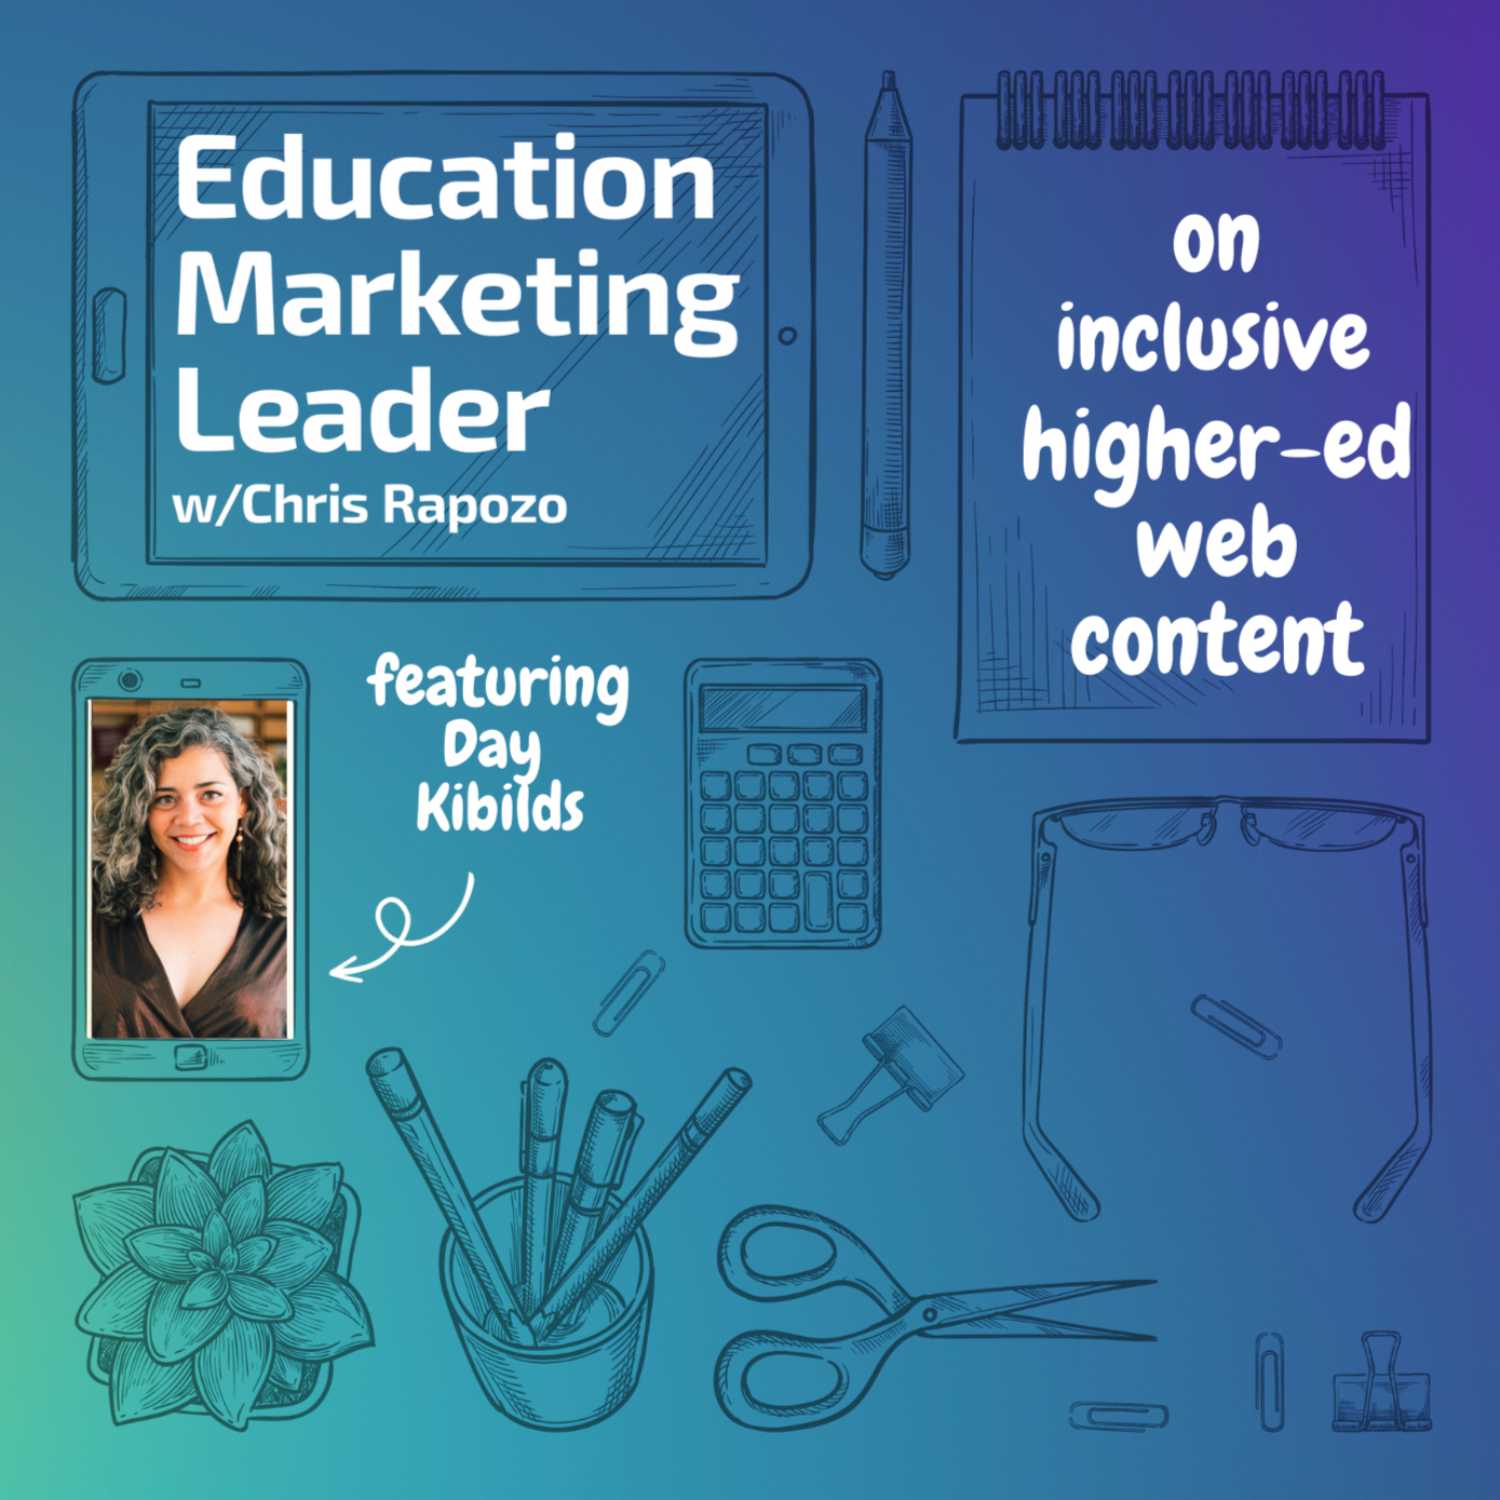 How To Create Inclusive Higher-Ed Web Content - An Interview with Day Kibilds